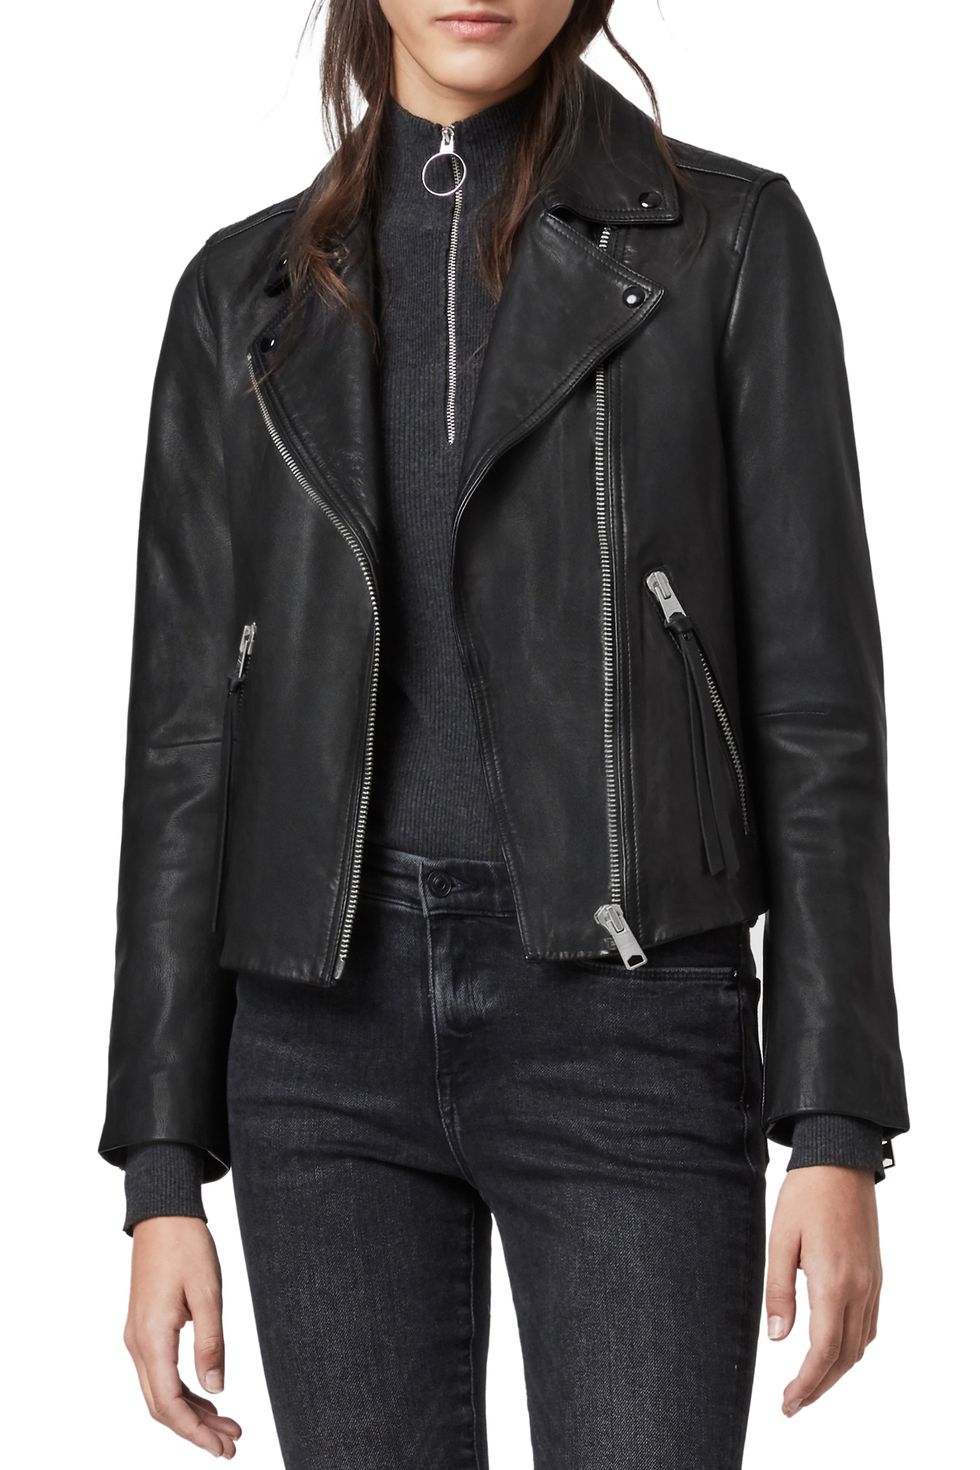 20 Best Leather Jackets for Women of 2023 That Never Go Out of Style